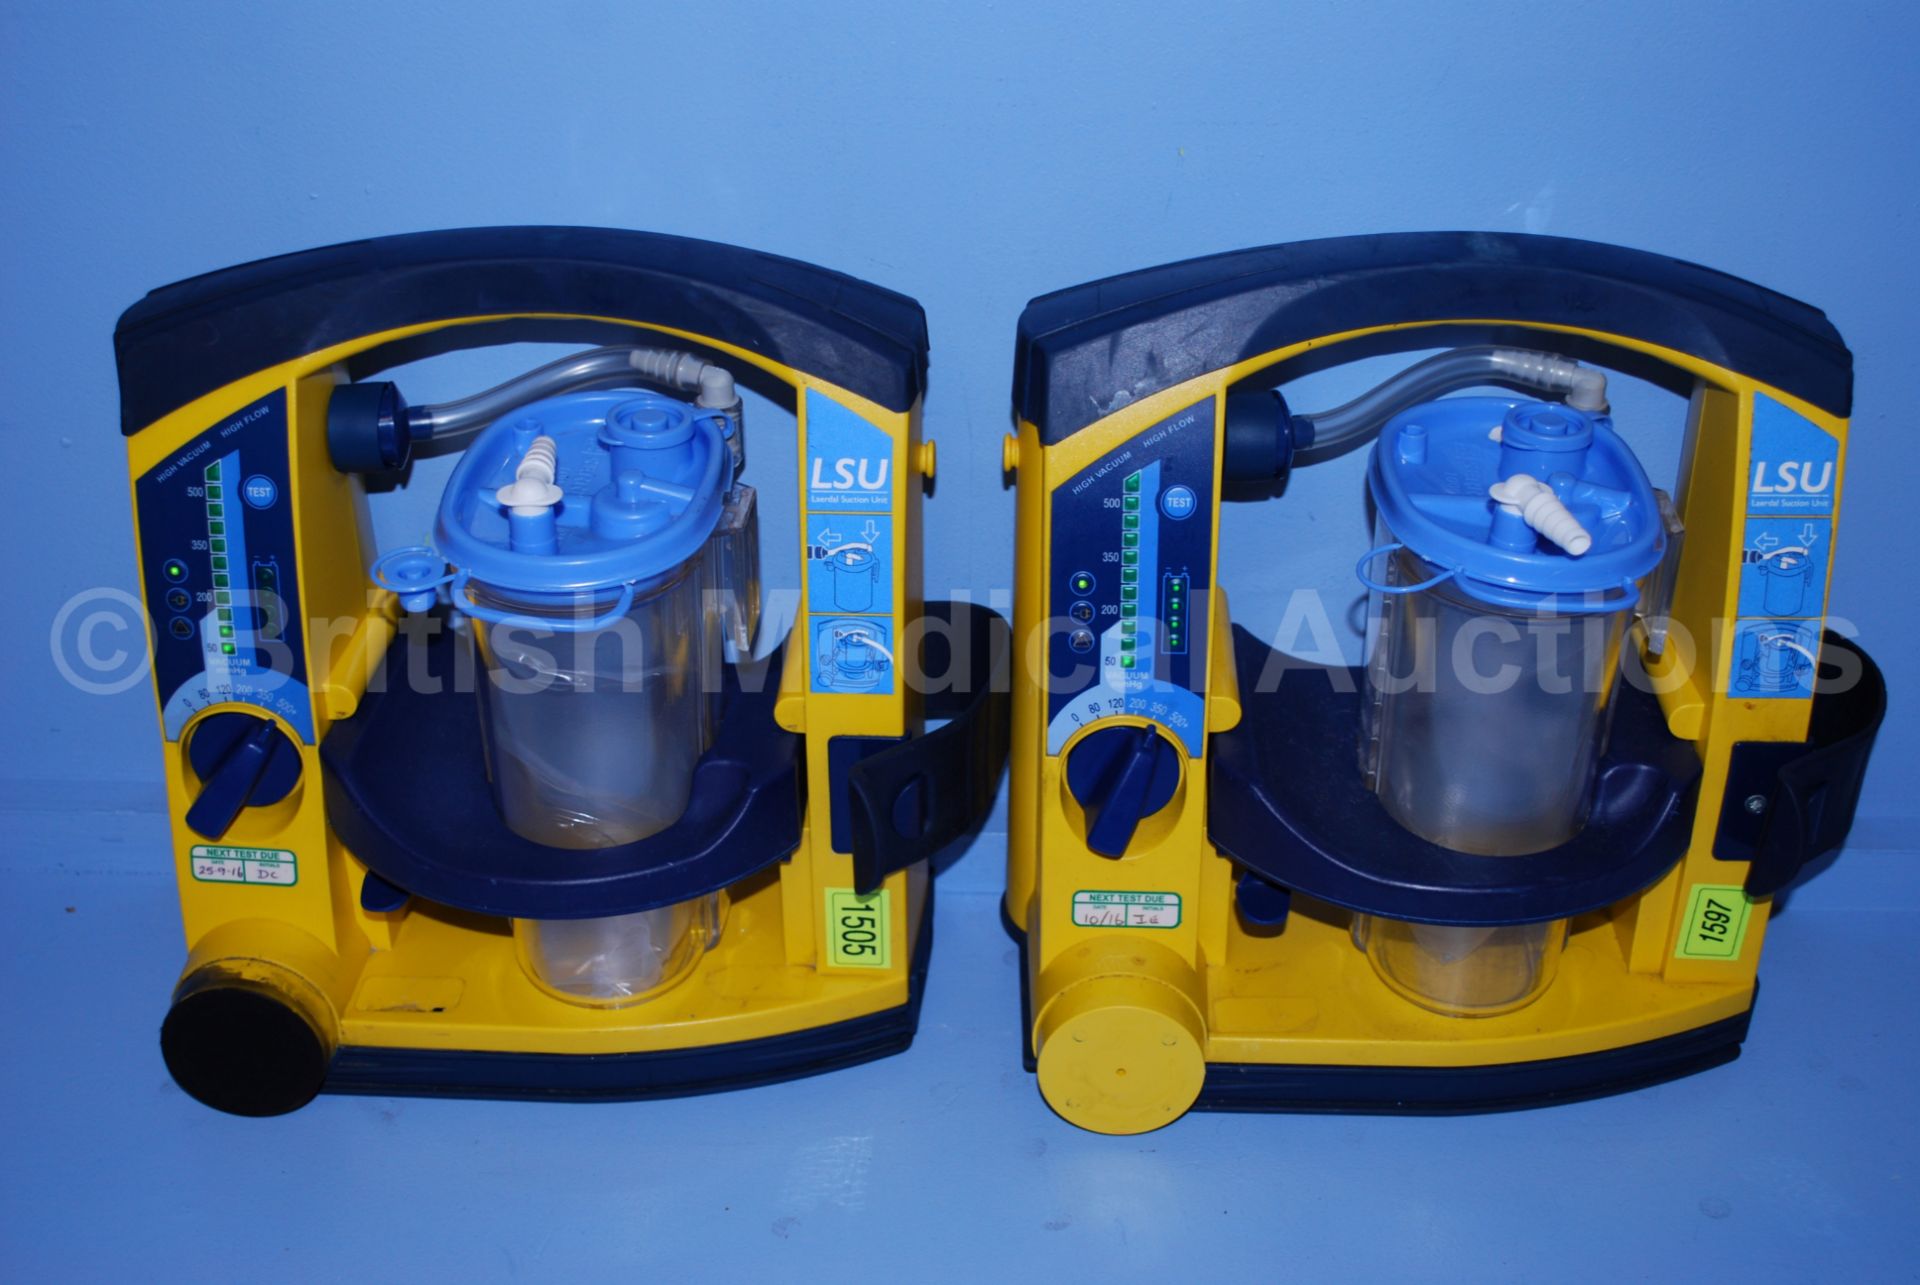 2 x Laerdal Suction Units with New Serres Cups (Bo